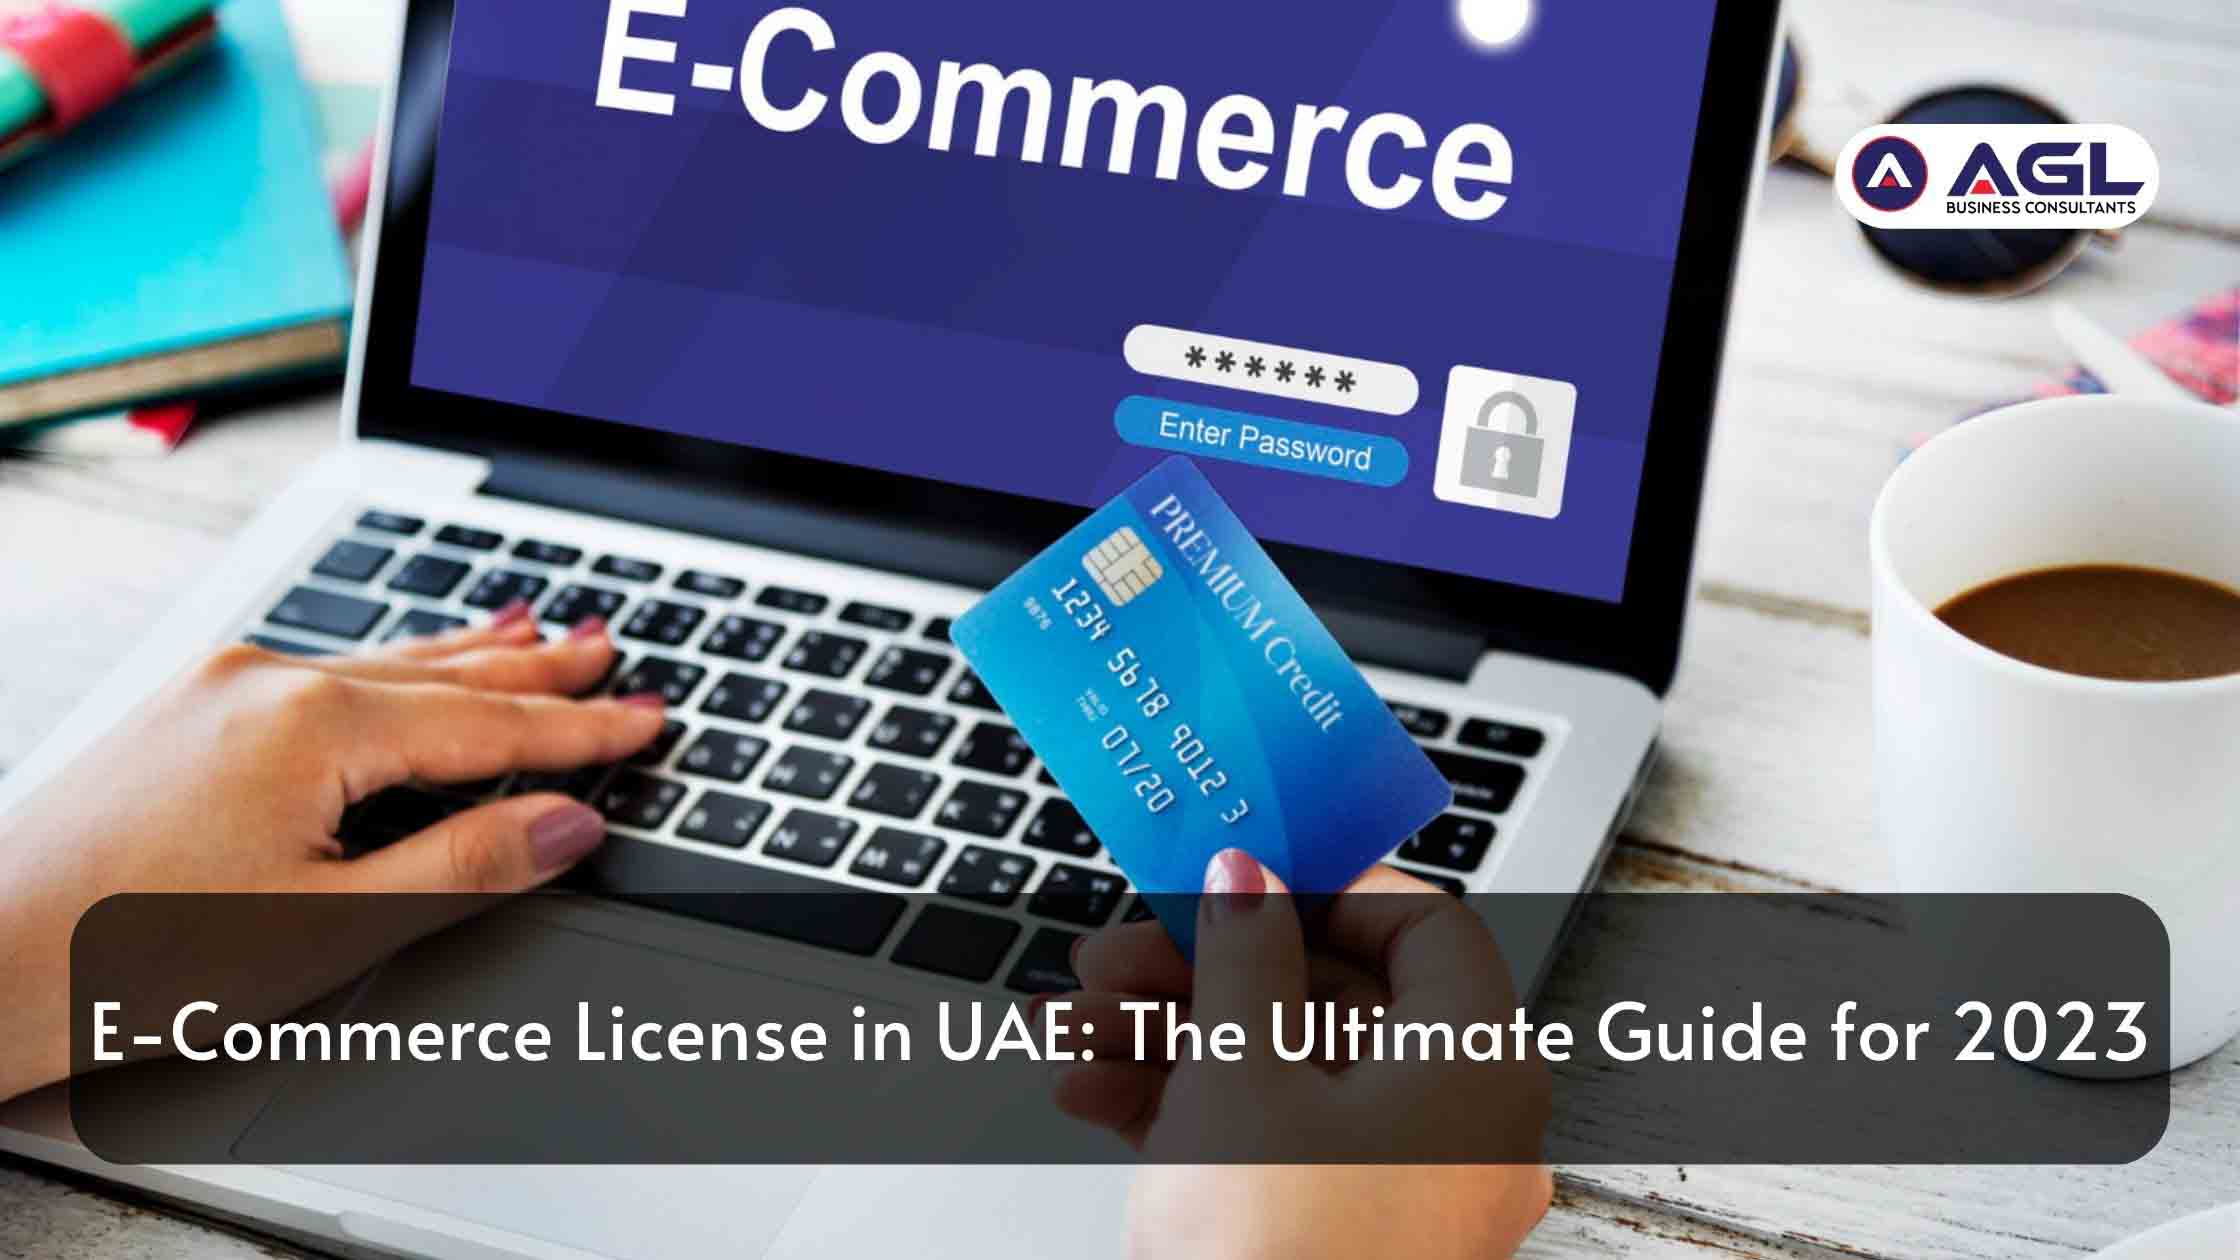 E-Commerce License in UAE: The Ultimate Guide for 2023